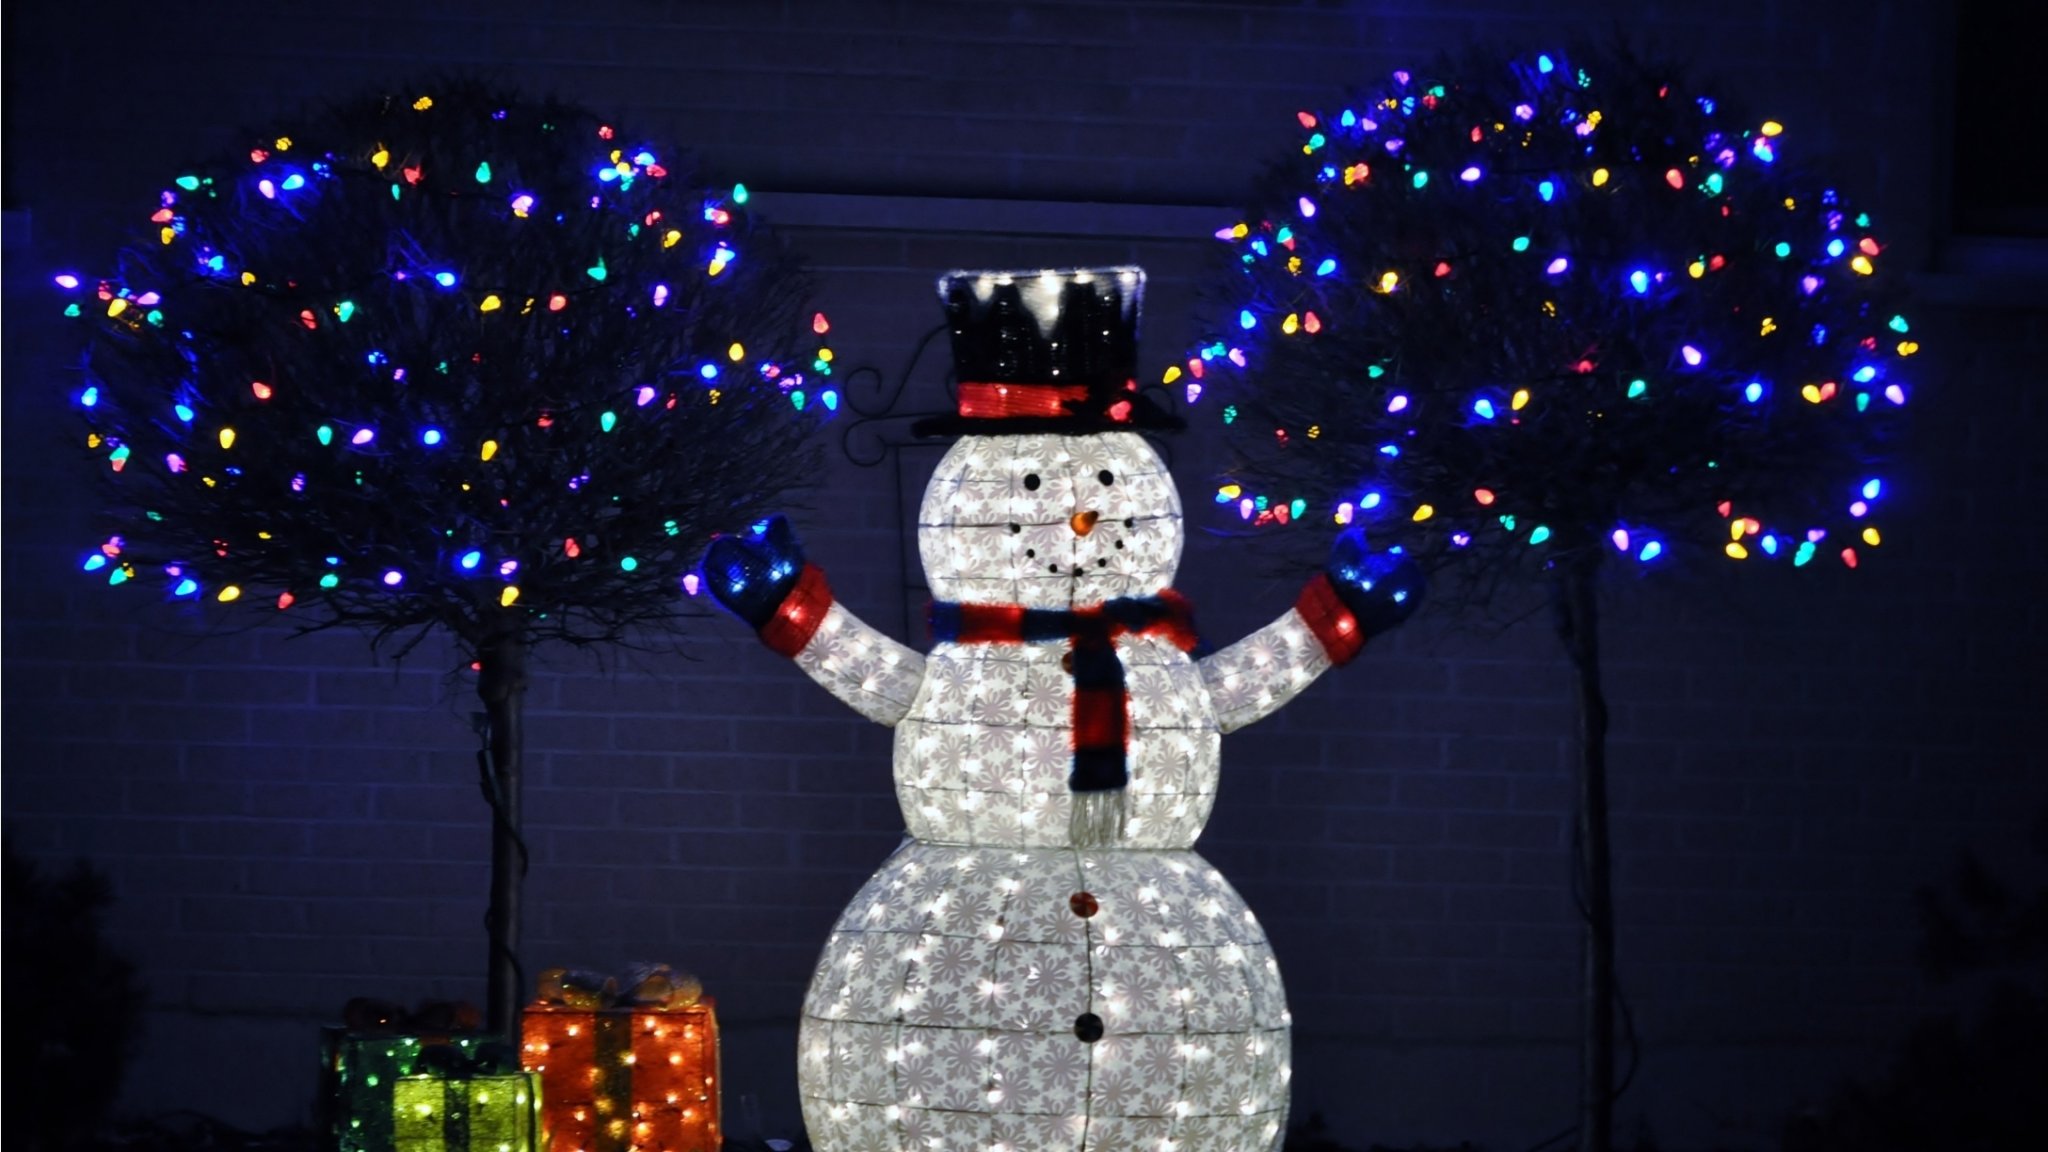 9 Home Holiday Displays That Really Livened Up Their Neighborhoods